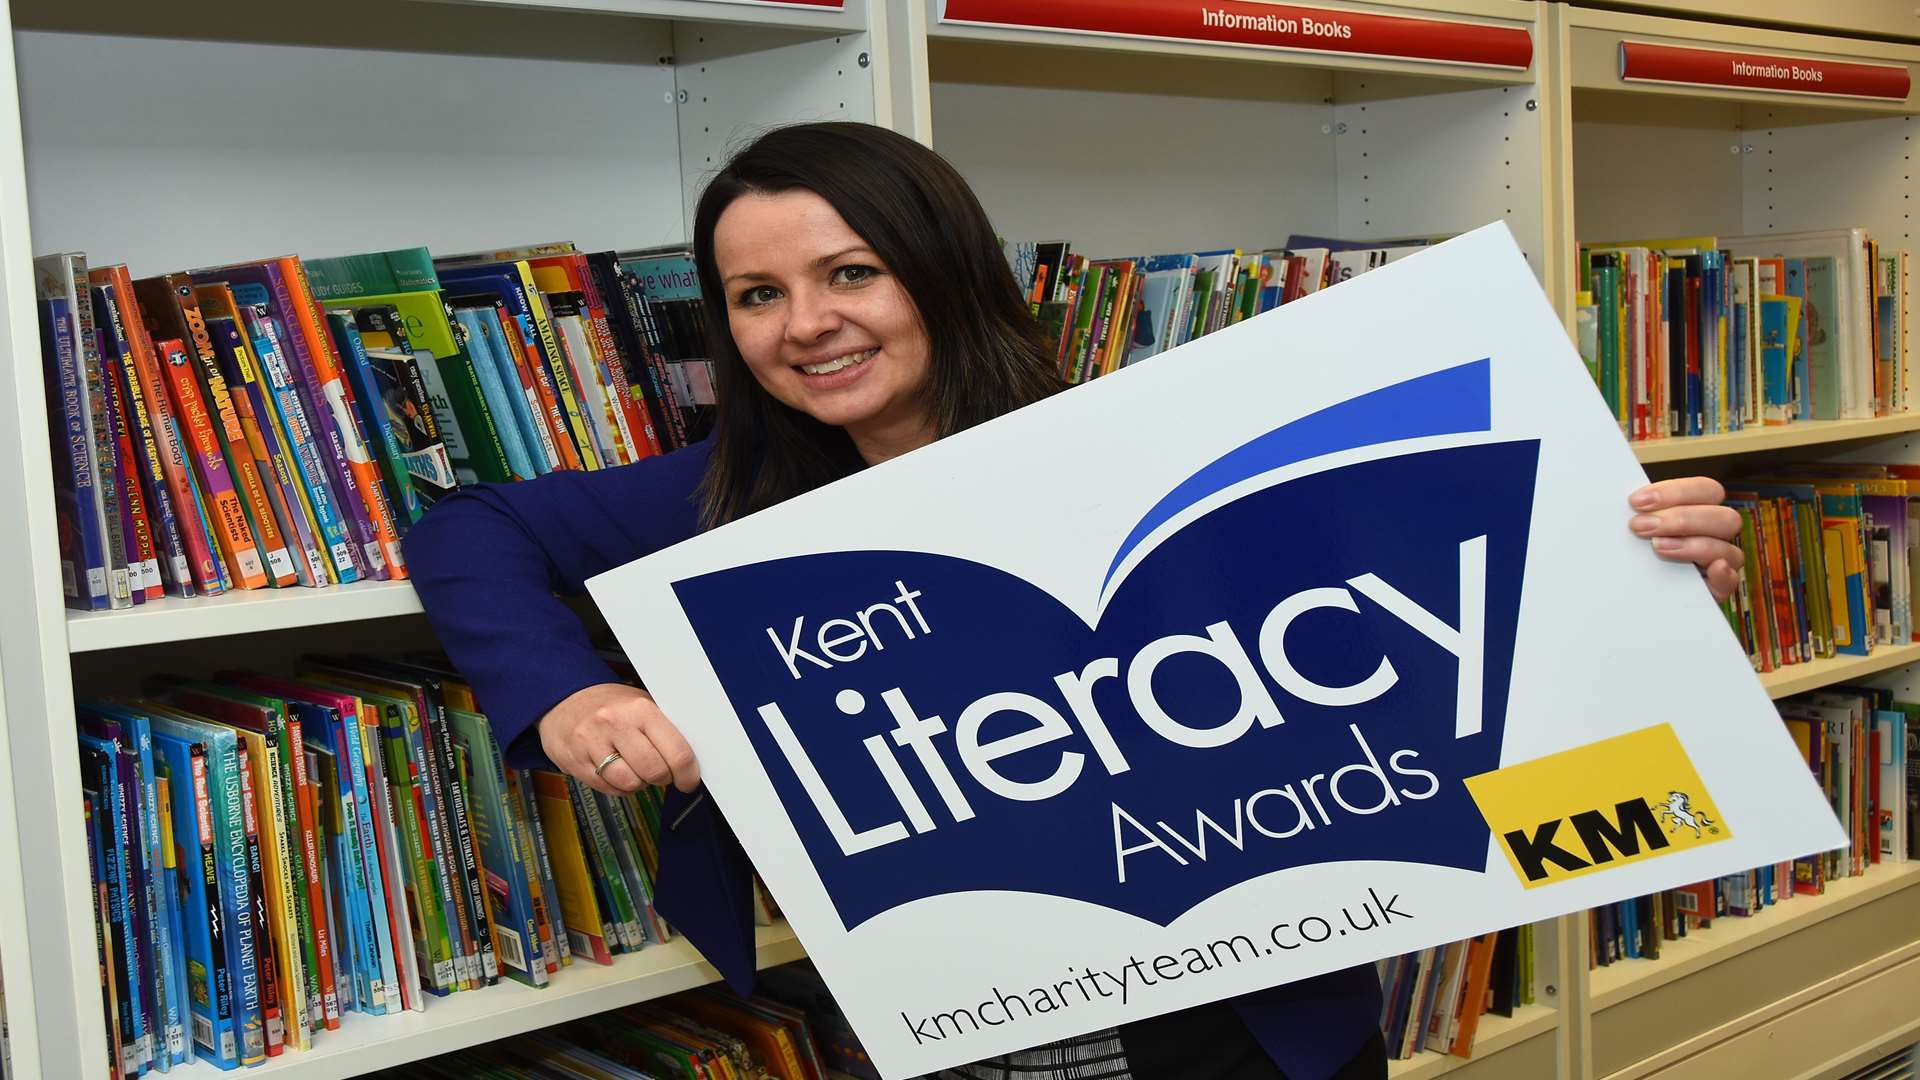 Alison Nightingale of Three R's Teacher Recruitment shows her support for the Kent Literacy Awards which are open for nominations until noon on April 29.